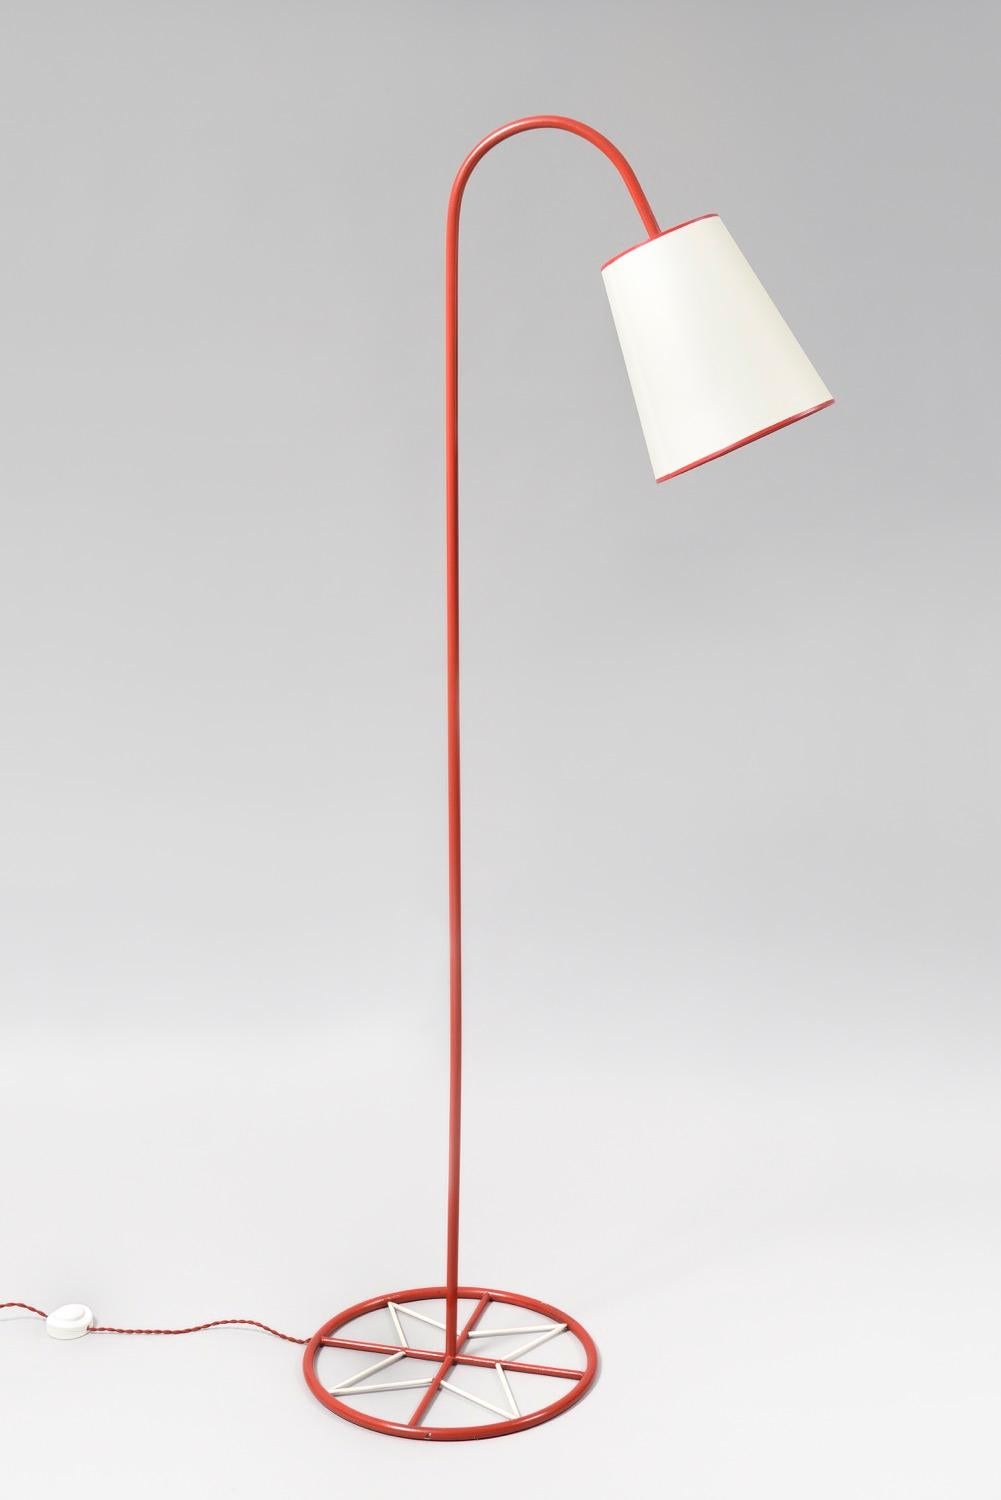 Jean Royère
Ski lamp, circa 1950
Painted steel, paper shade 
Measures: 64 in. (163 cm) high.
   
Provenance :
Design Sale Sotheby's NY 
Private collection, Britain, France



Jean Royère (1902-1981) is a French interior designer born in